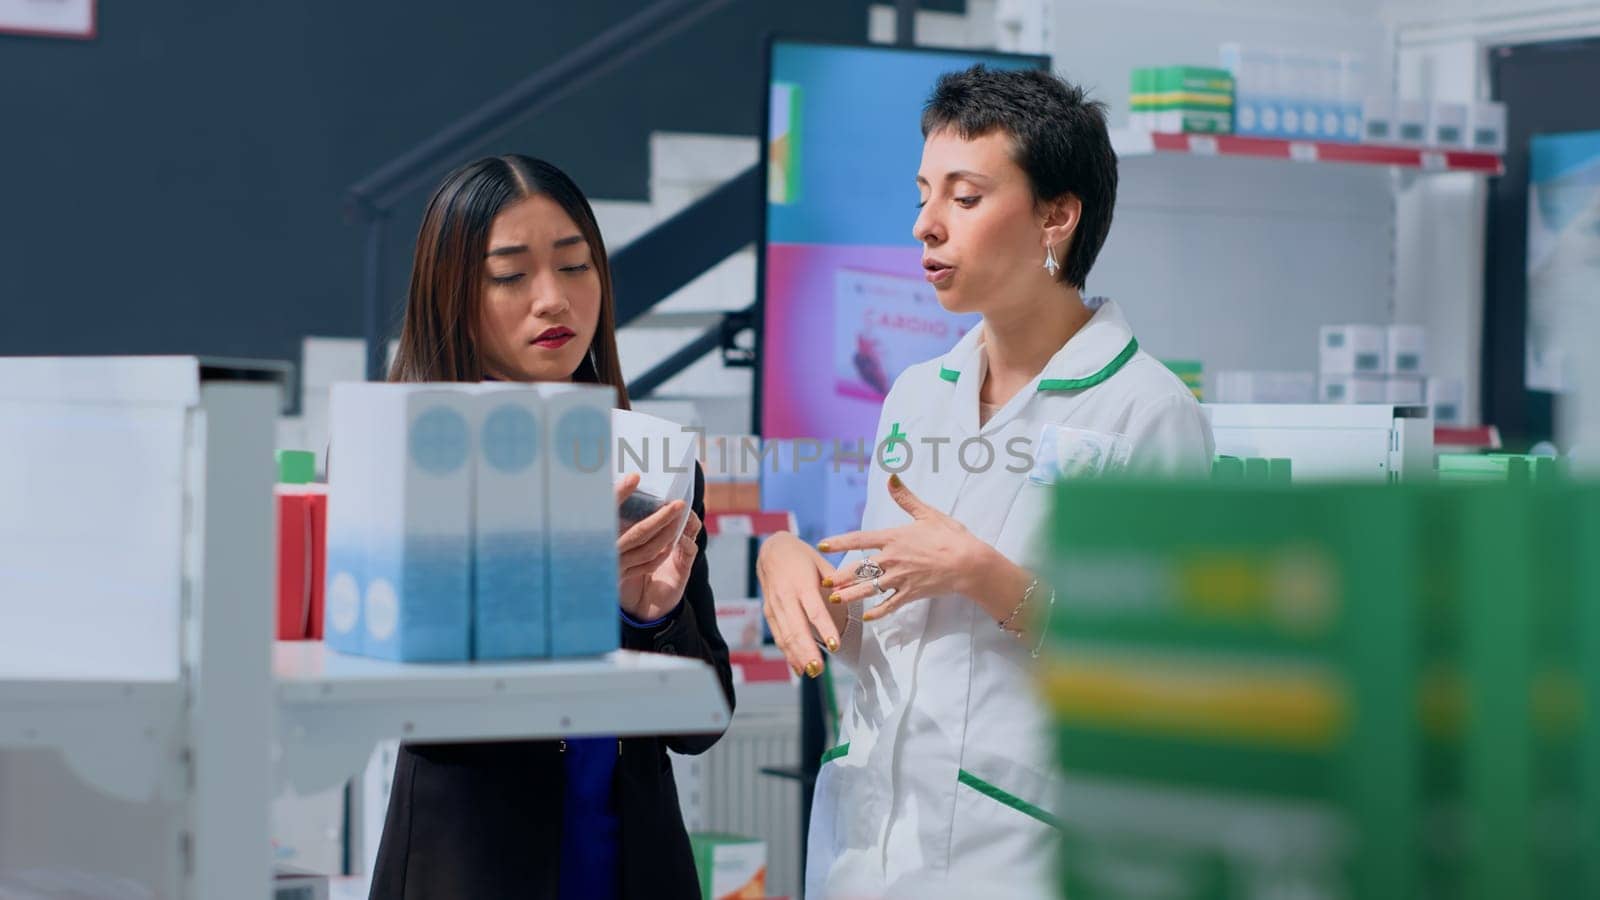 Shopper in dispensary needing prescription treatment to subdue ache, asking druggist to help her pick best medicament. Proficient pharmacologist assisting customer with product insight